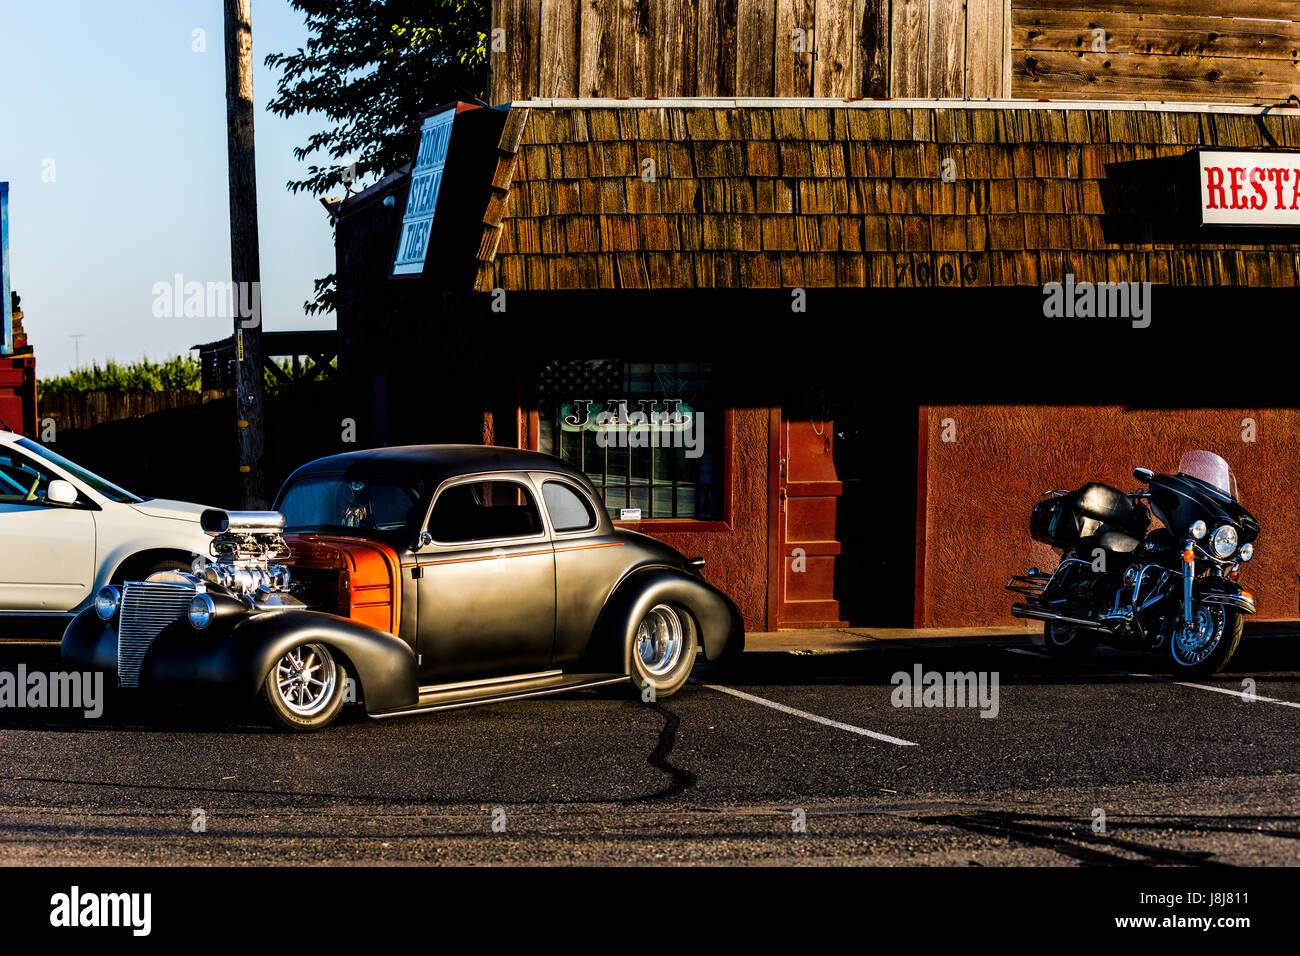 A Harley Davidson Motorcycle and a custom 1940 Ford Coupe parked at a bar in rural California Stock Photo